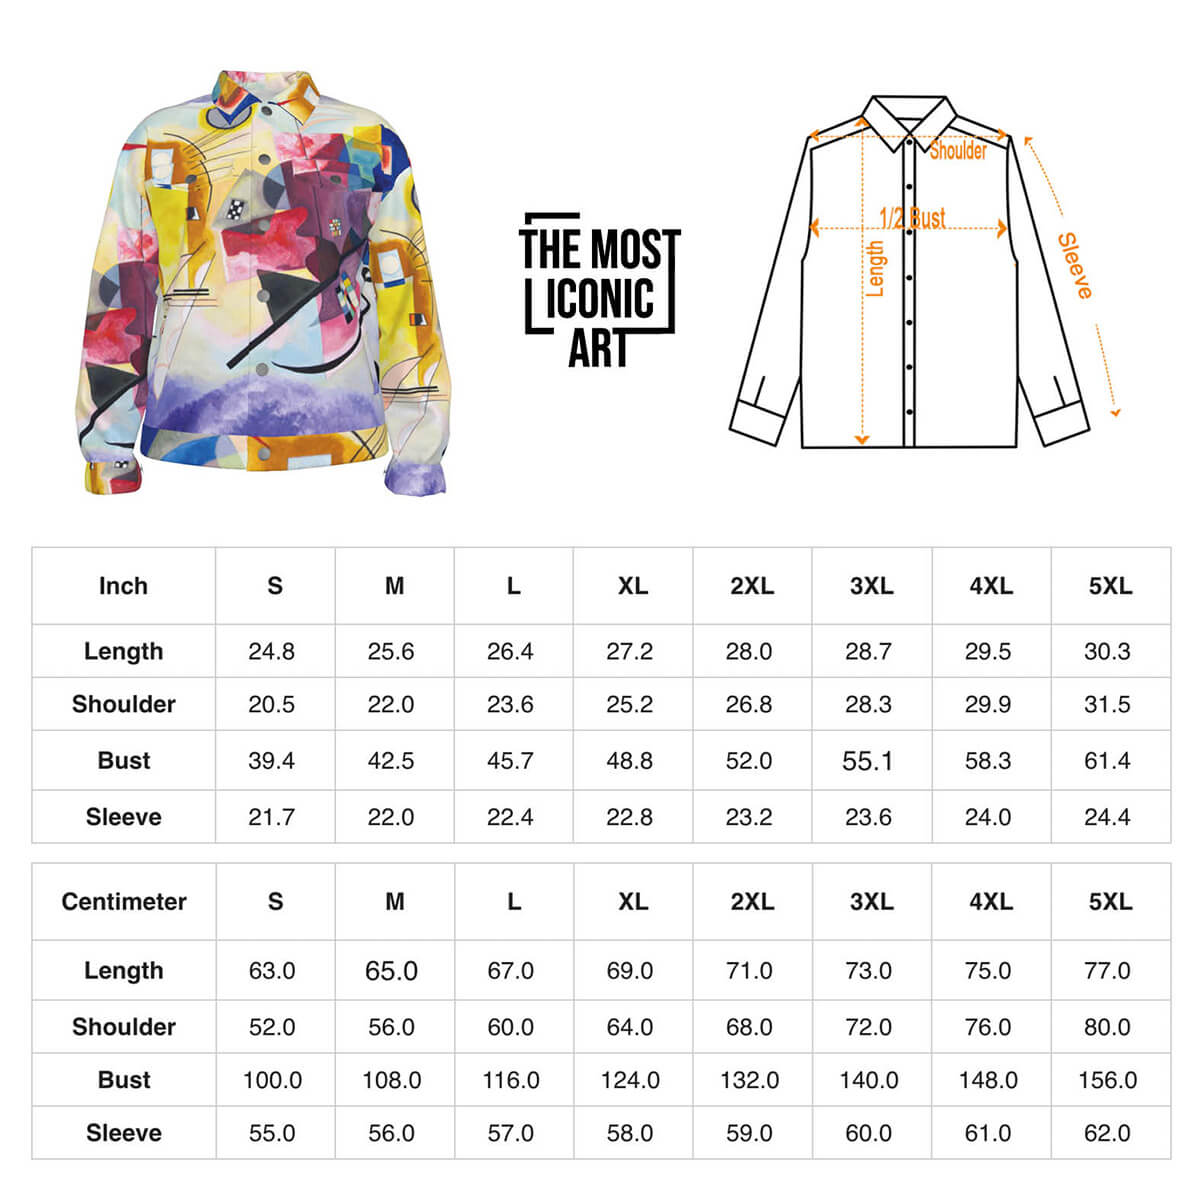 Colorful Outerwear Inspired by Modern Art